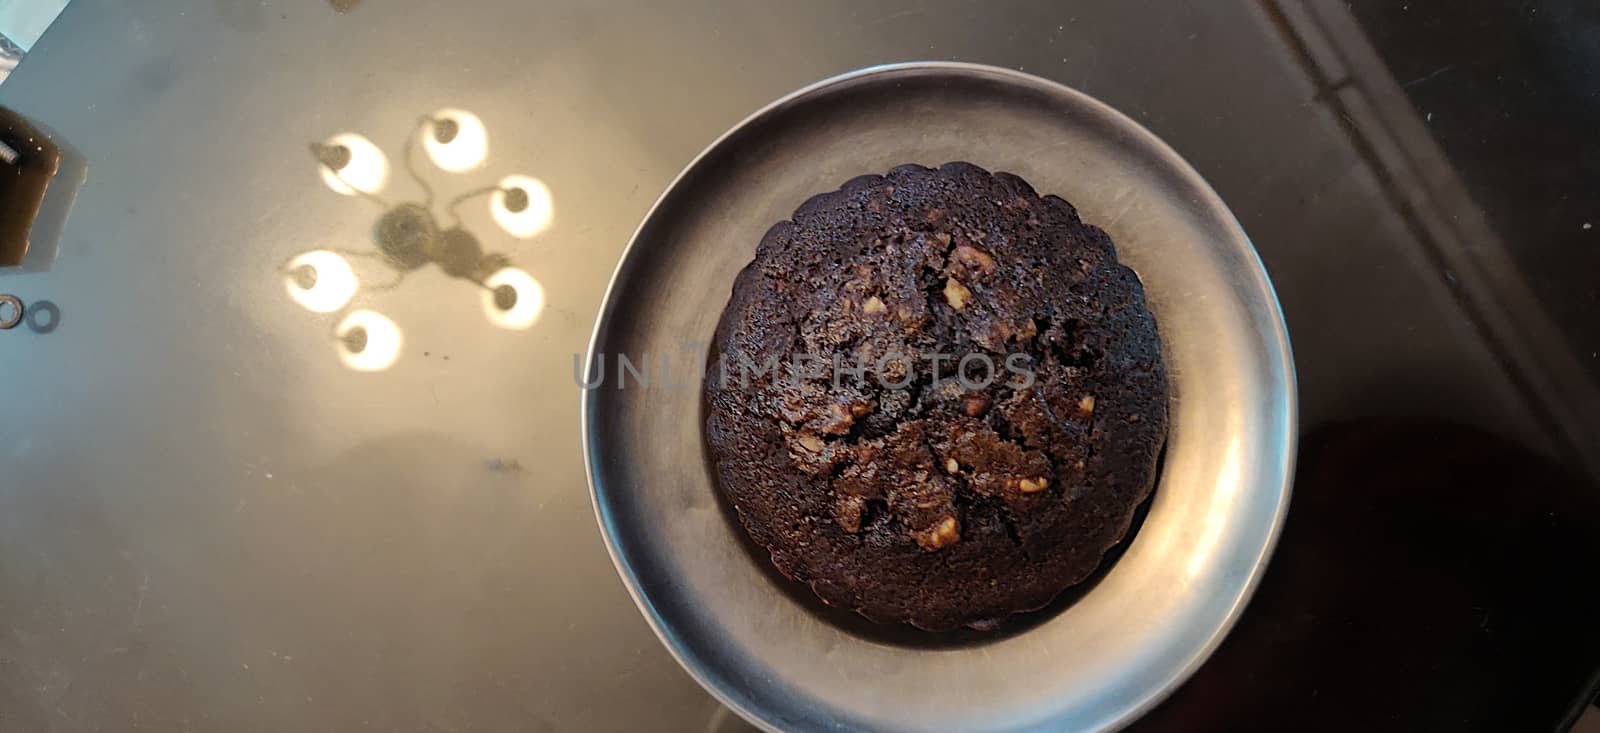 A chocolate walnut muffin on a steel plate against a reflective surface reflecting chandelier lights